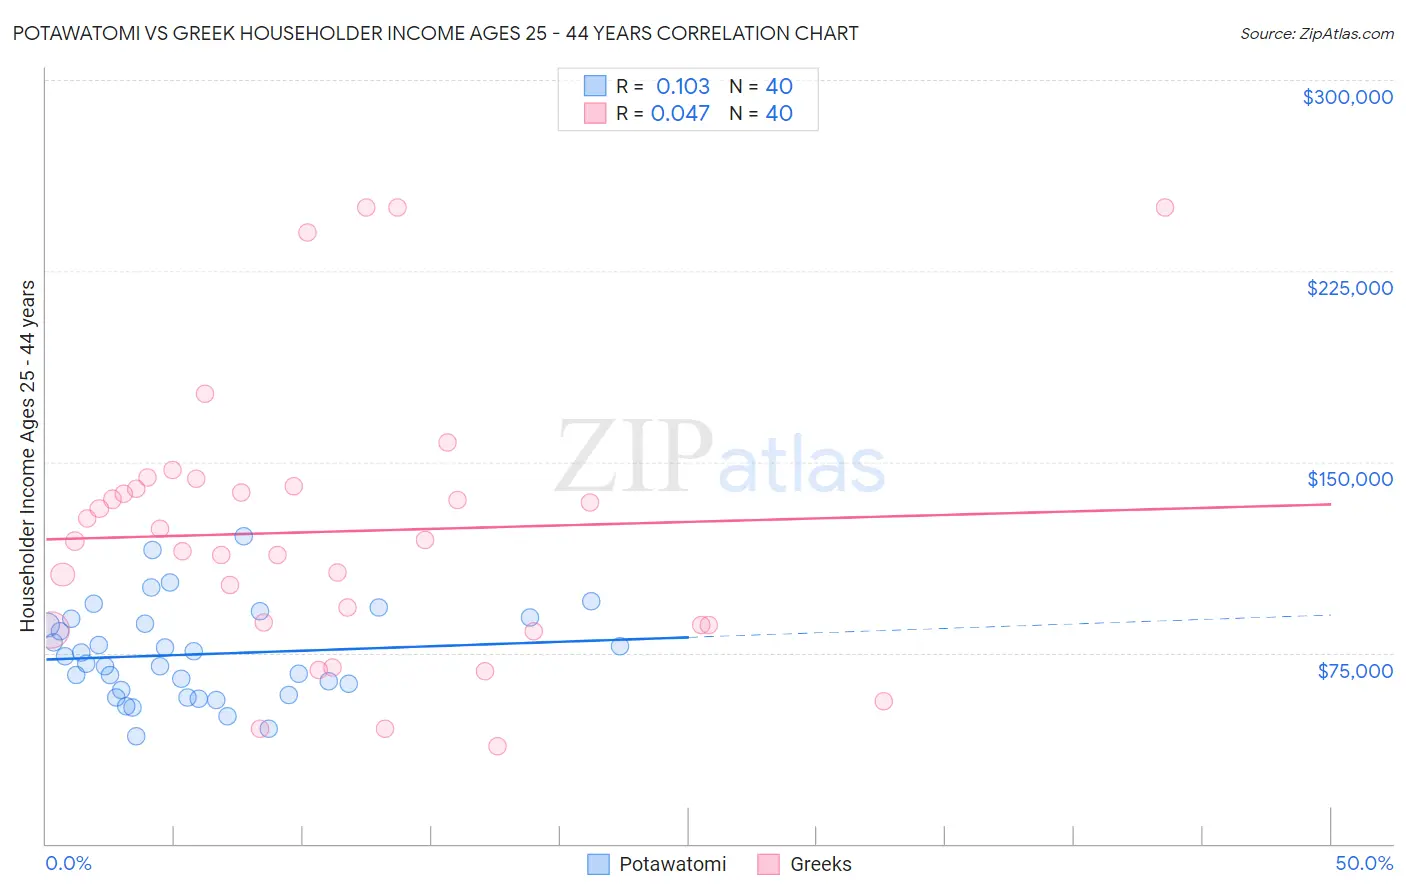 Potawatomi vs Greek Householder Income Ages 25 - 44 years